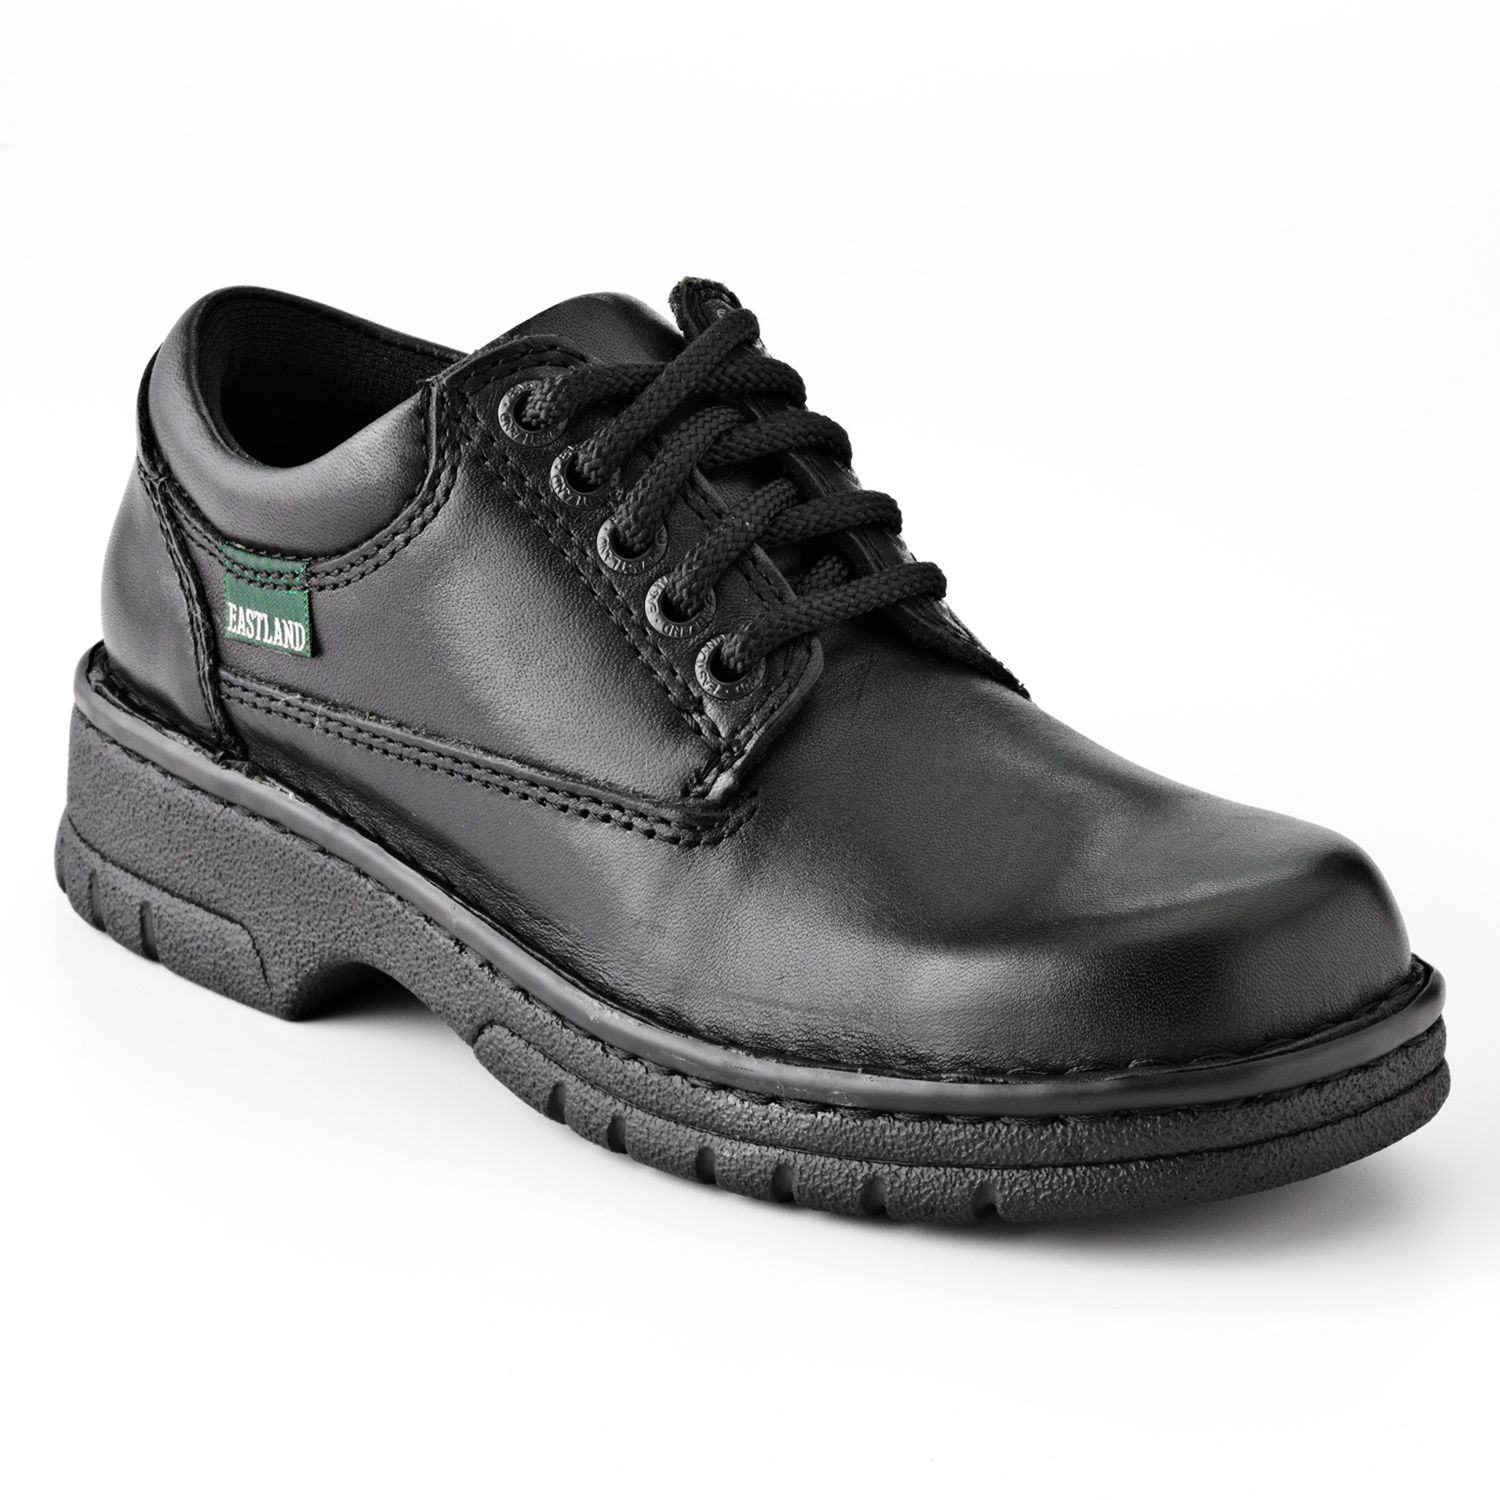 Image for Eastland Plainview Women's Oxford Shoes at Kohl's.